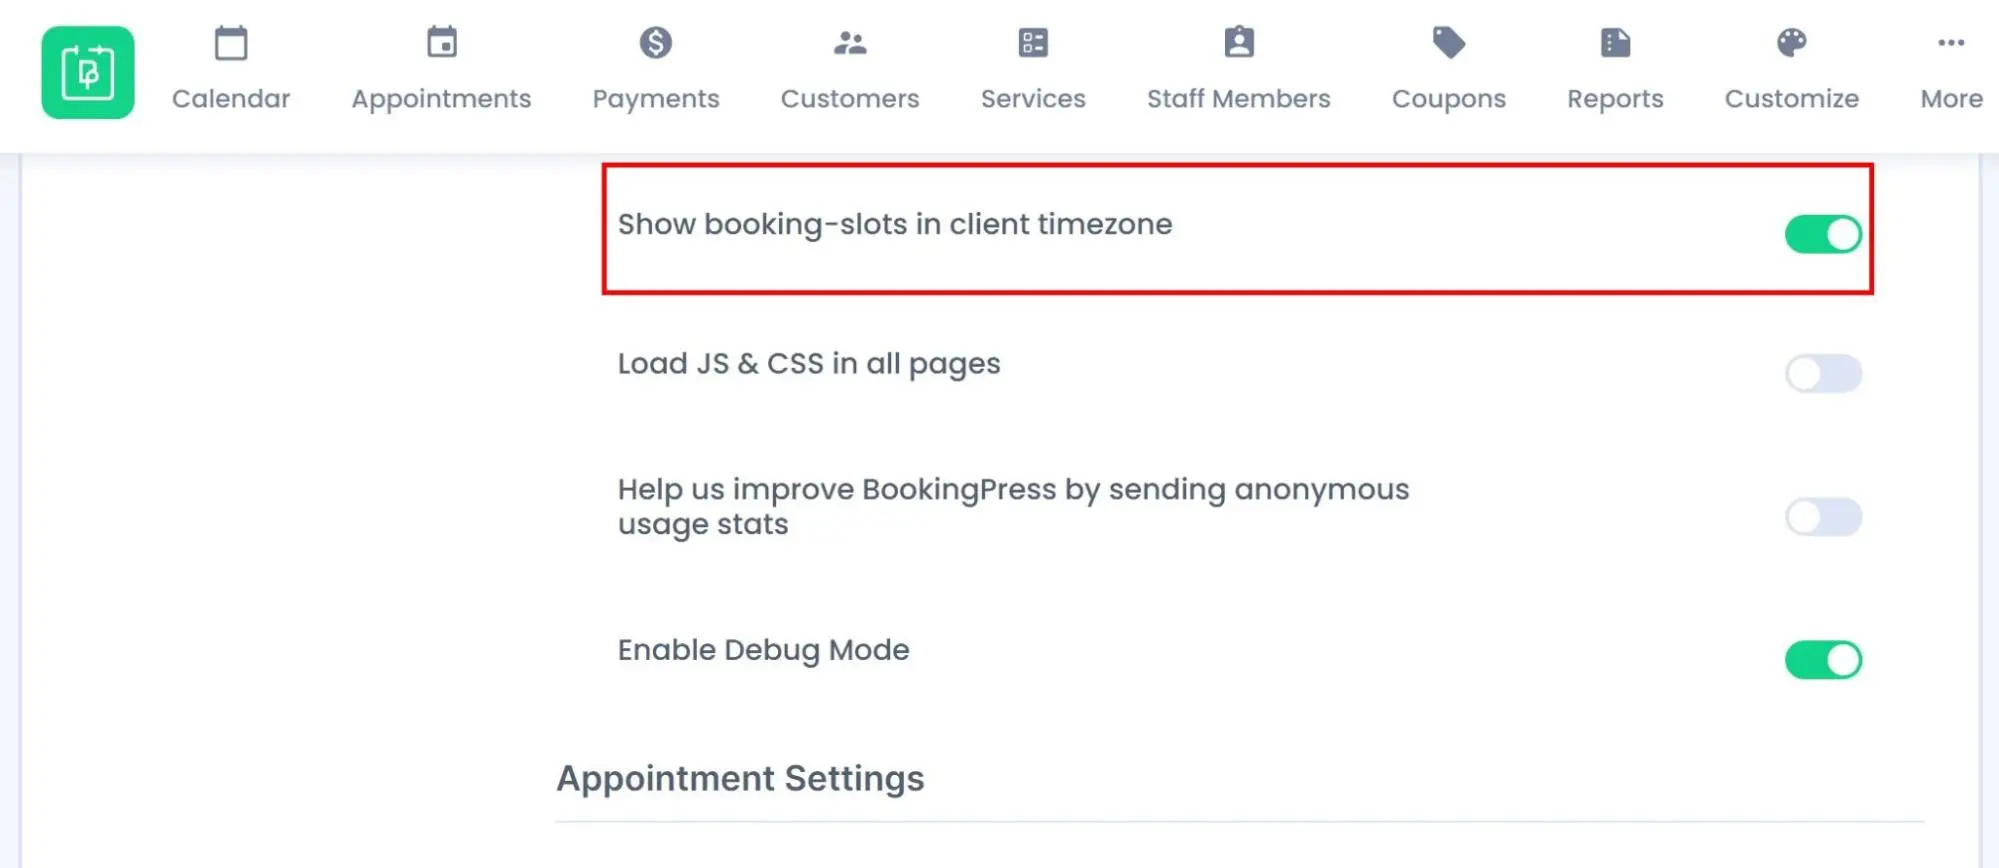 Show booking-slots in client time zone